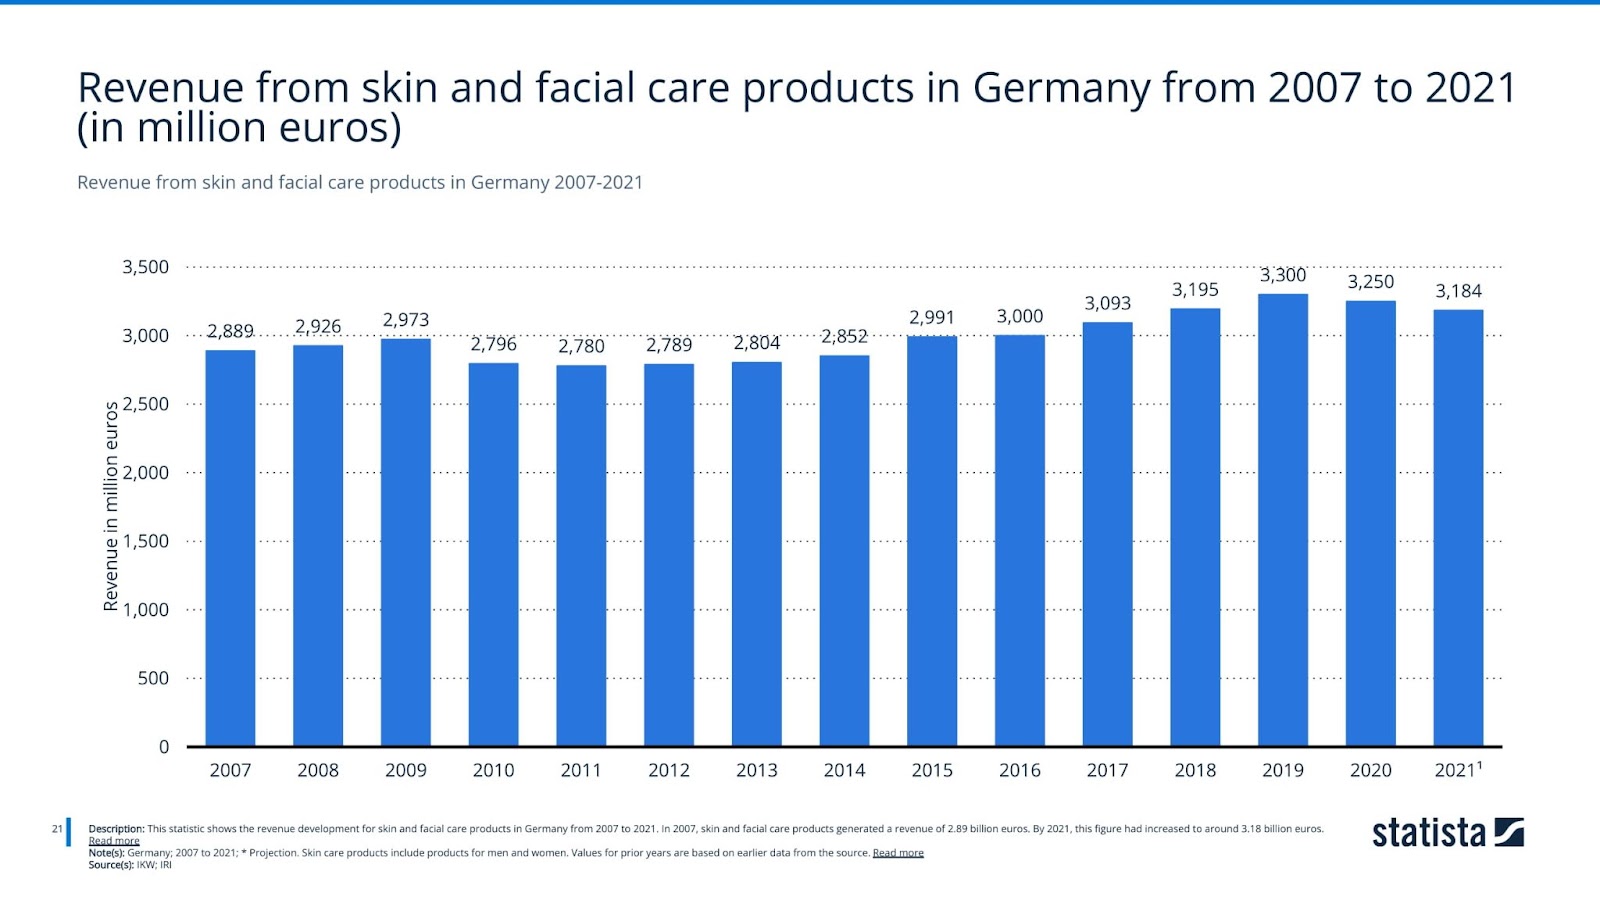 Revenue from skin and facial care products in Germany 2007-2021